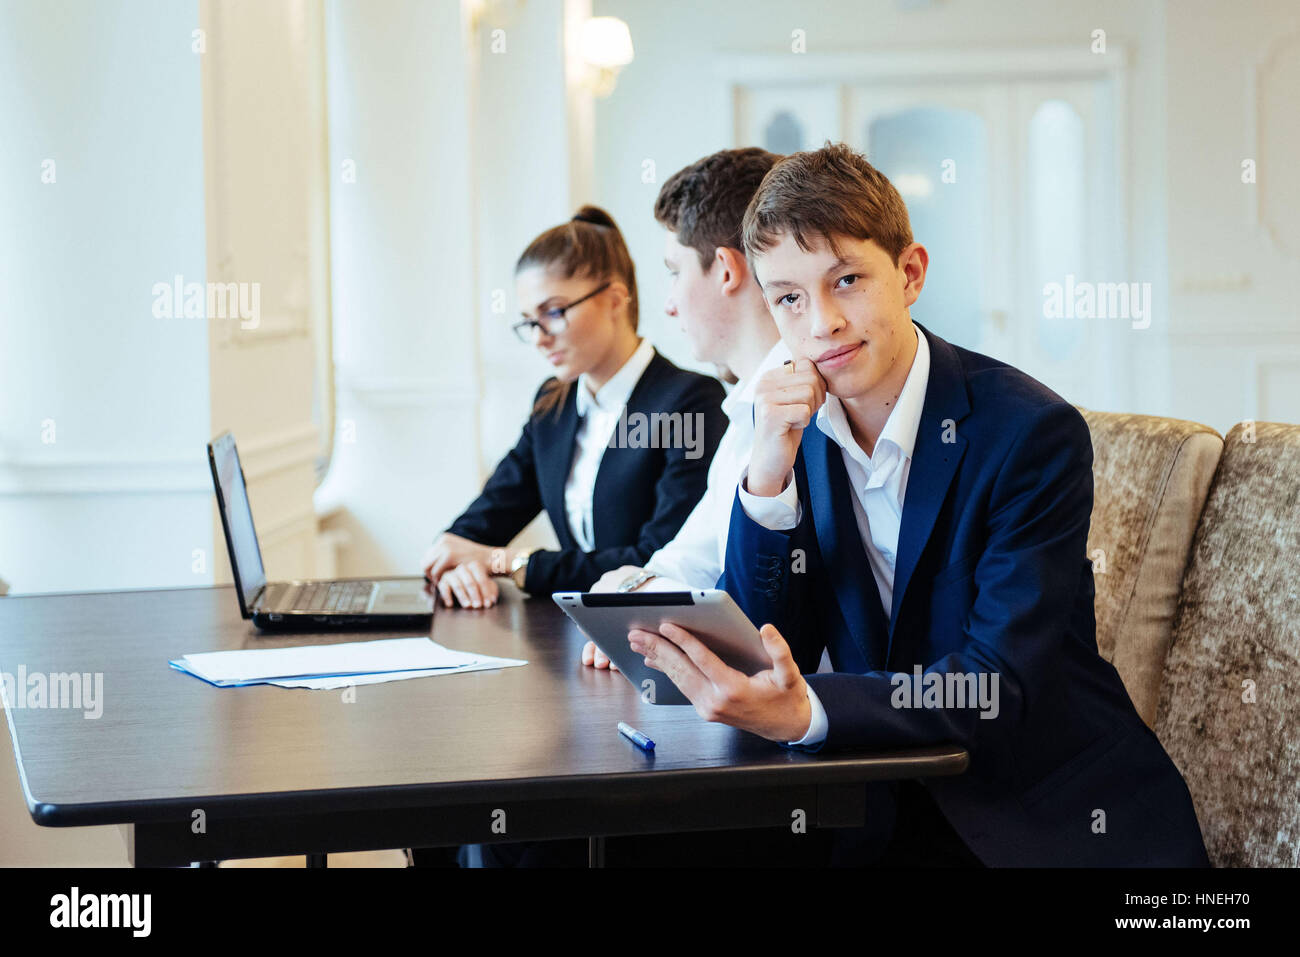 Students with laptops and tablet Stock Photo